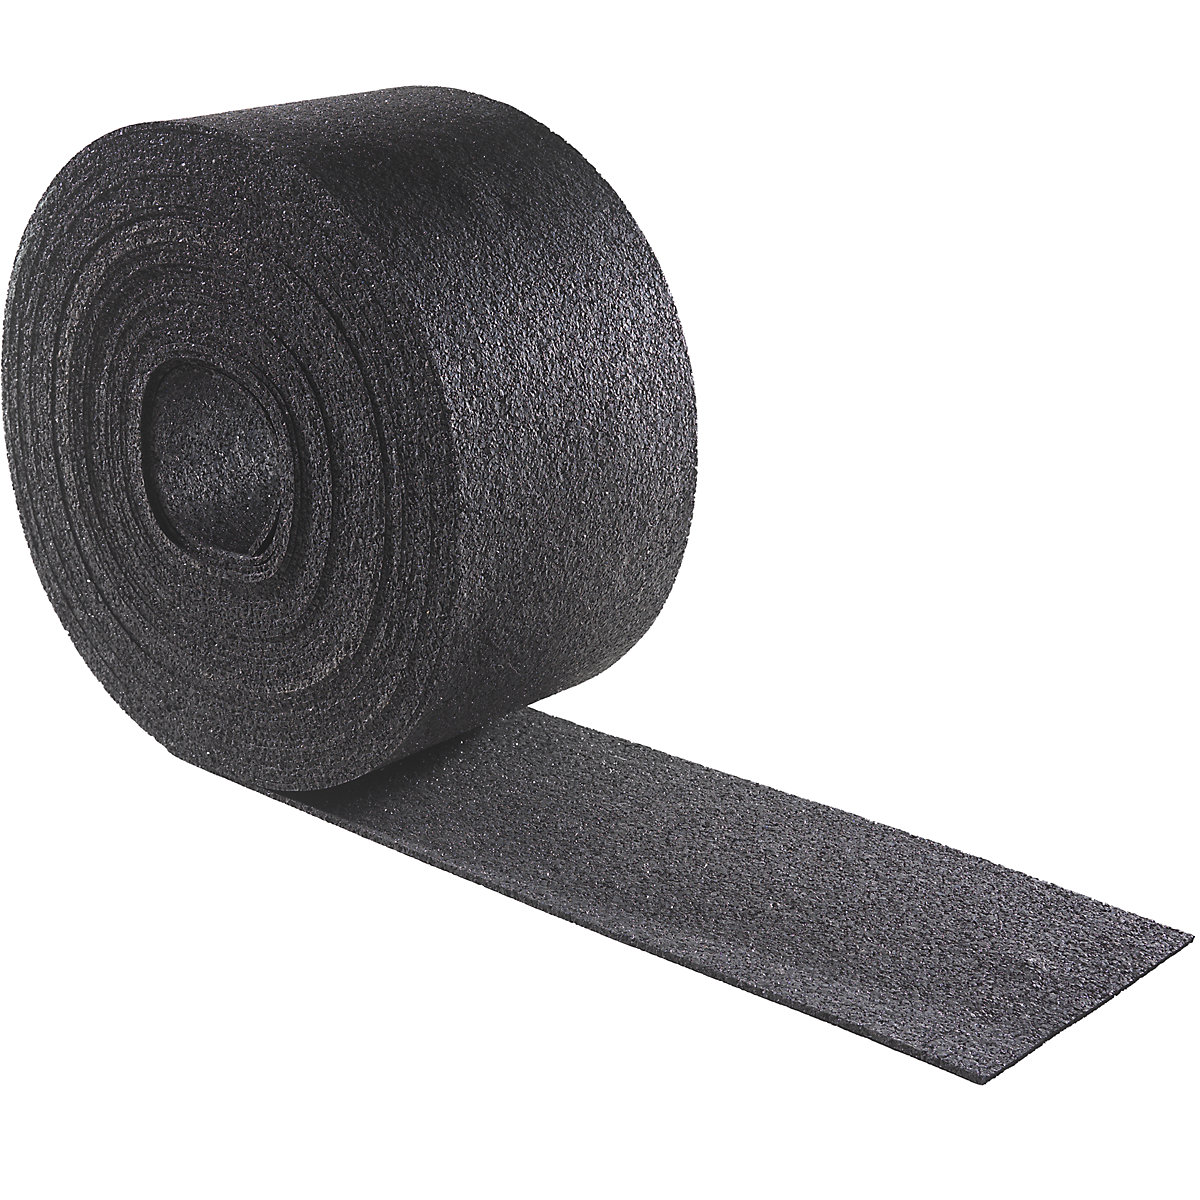 MT non-slip mat, for securing loads, LxW 20000 x 150 mm, pack of 2-2